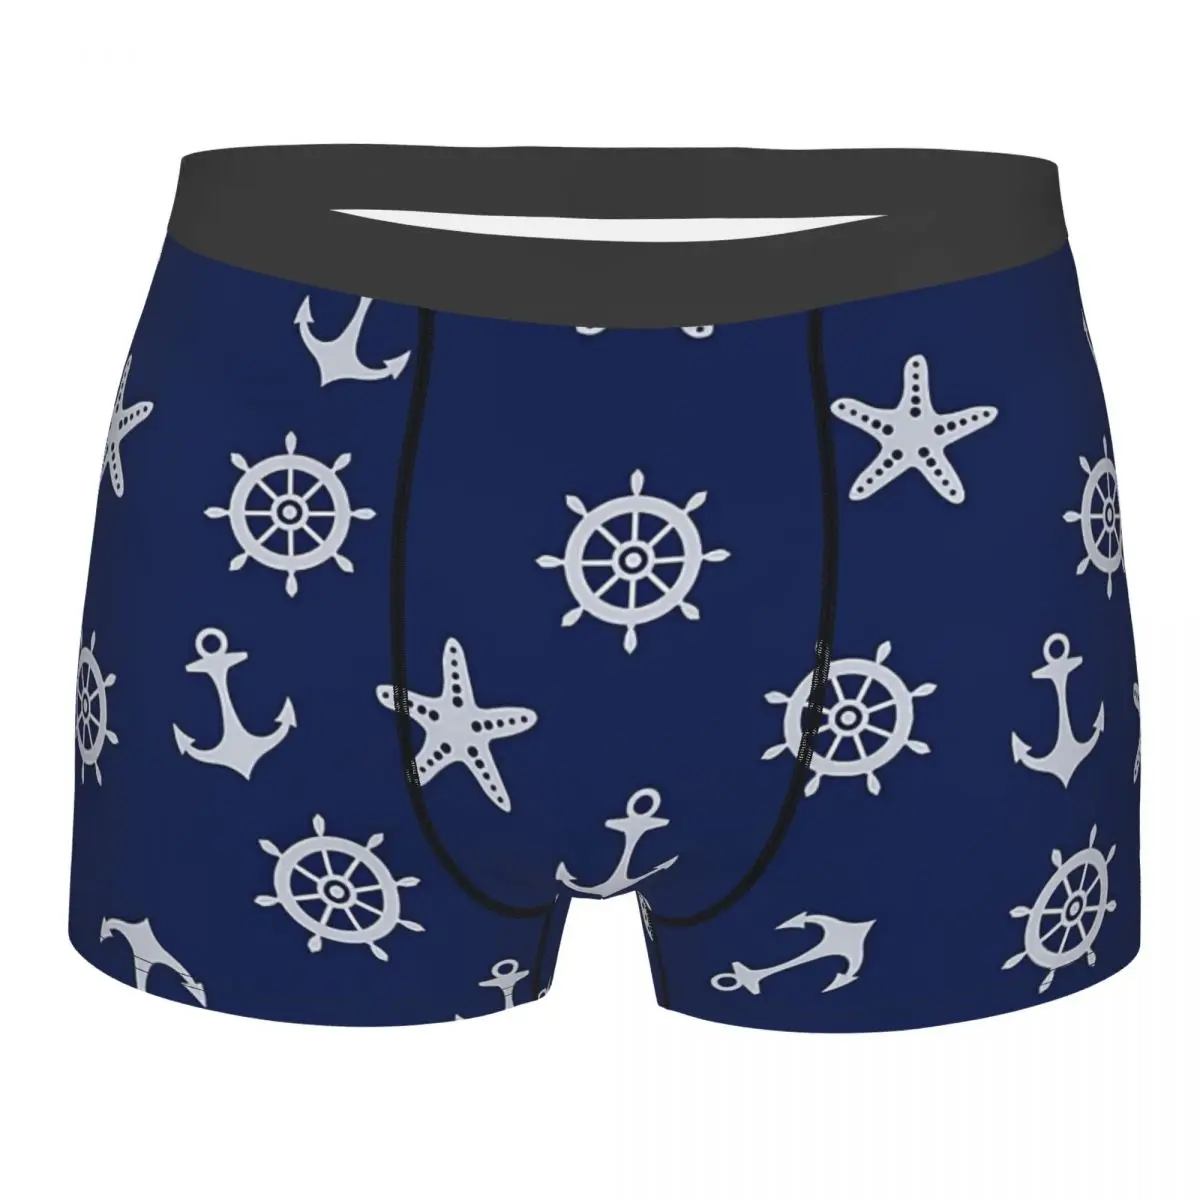 Navy Blue Nautical Anchor Pattern Underpants Breathbale Panties Male Underwear Print Shorts Boxer Briefs navy blue stripes nautical anchor sling crossbody chest bag men fashion shoulder backpack for camping biking